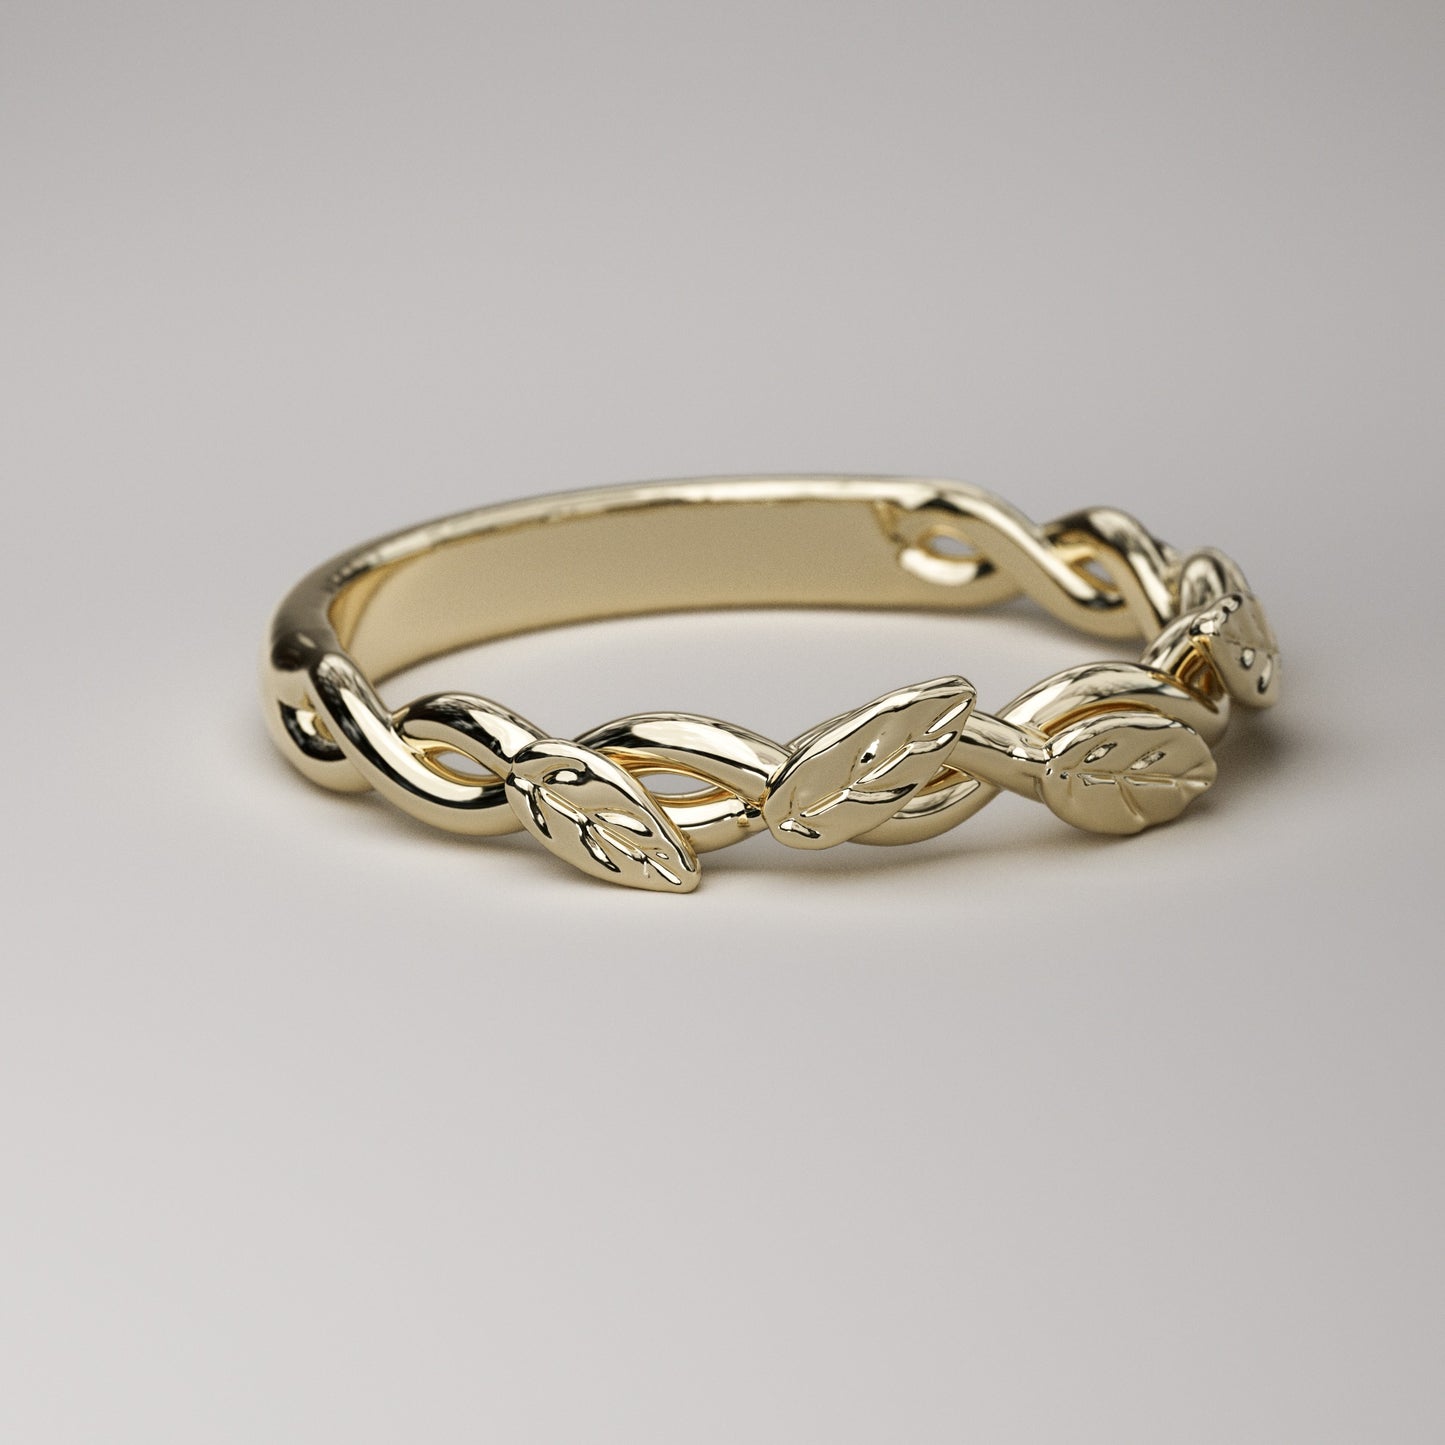 Intertwined Vine Ring